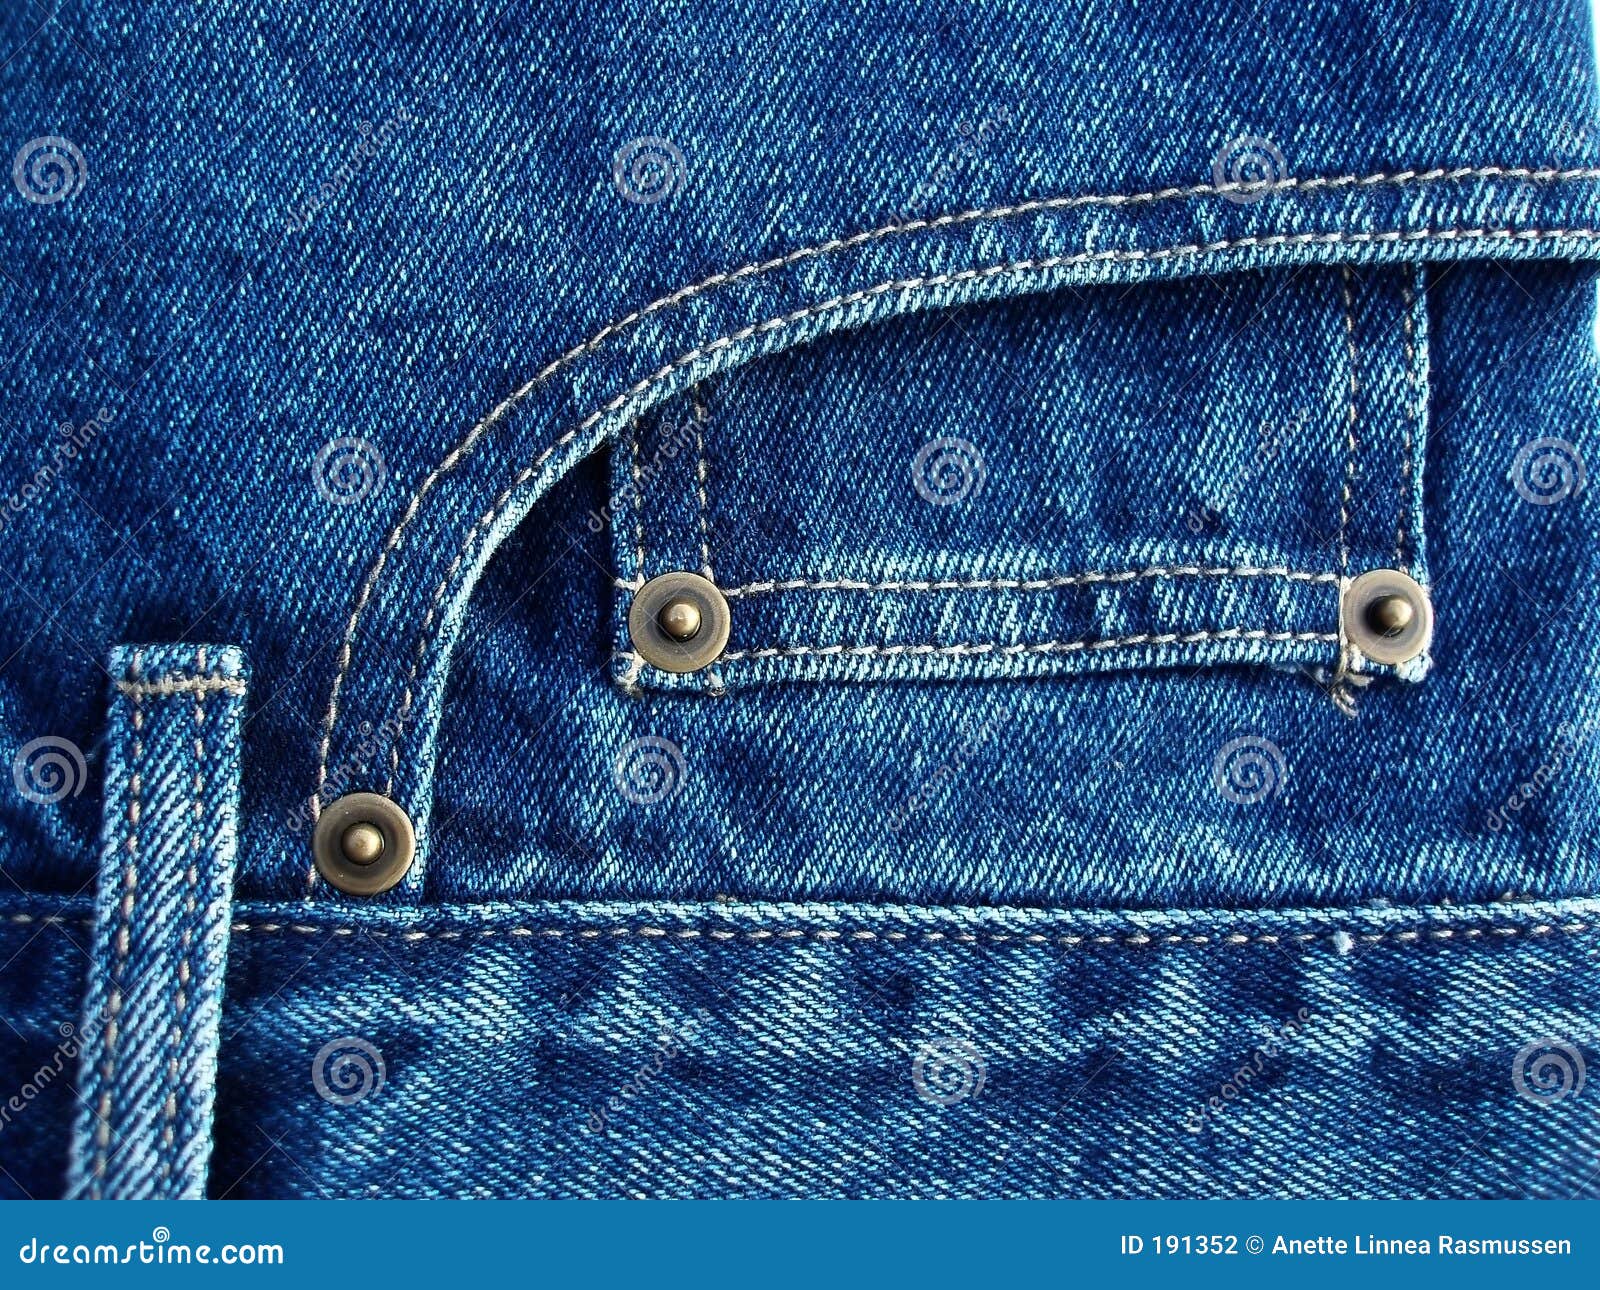 Details from blue jeans stock photo. Image of canvas, everyday - 191352